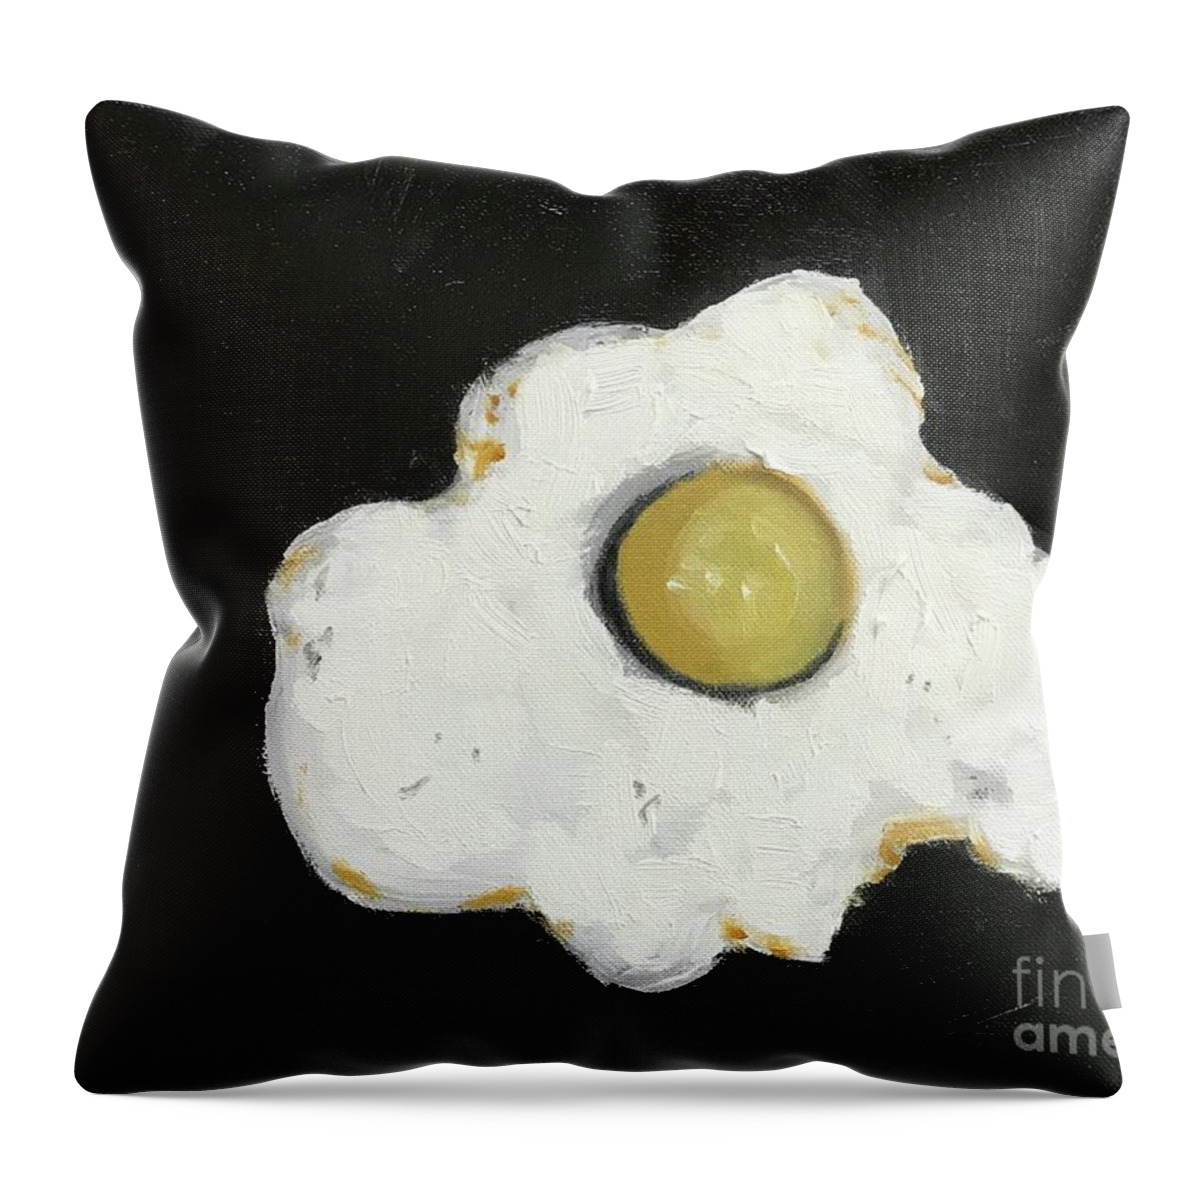 Original Art Work Throw Pillow featuring the painting Fried Egg by Theresa Honeycheck